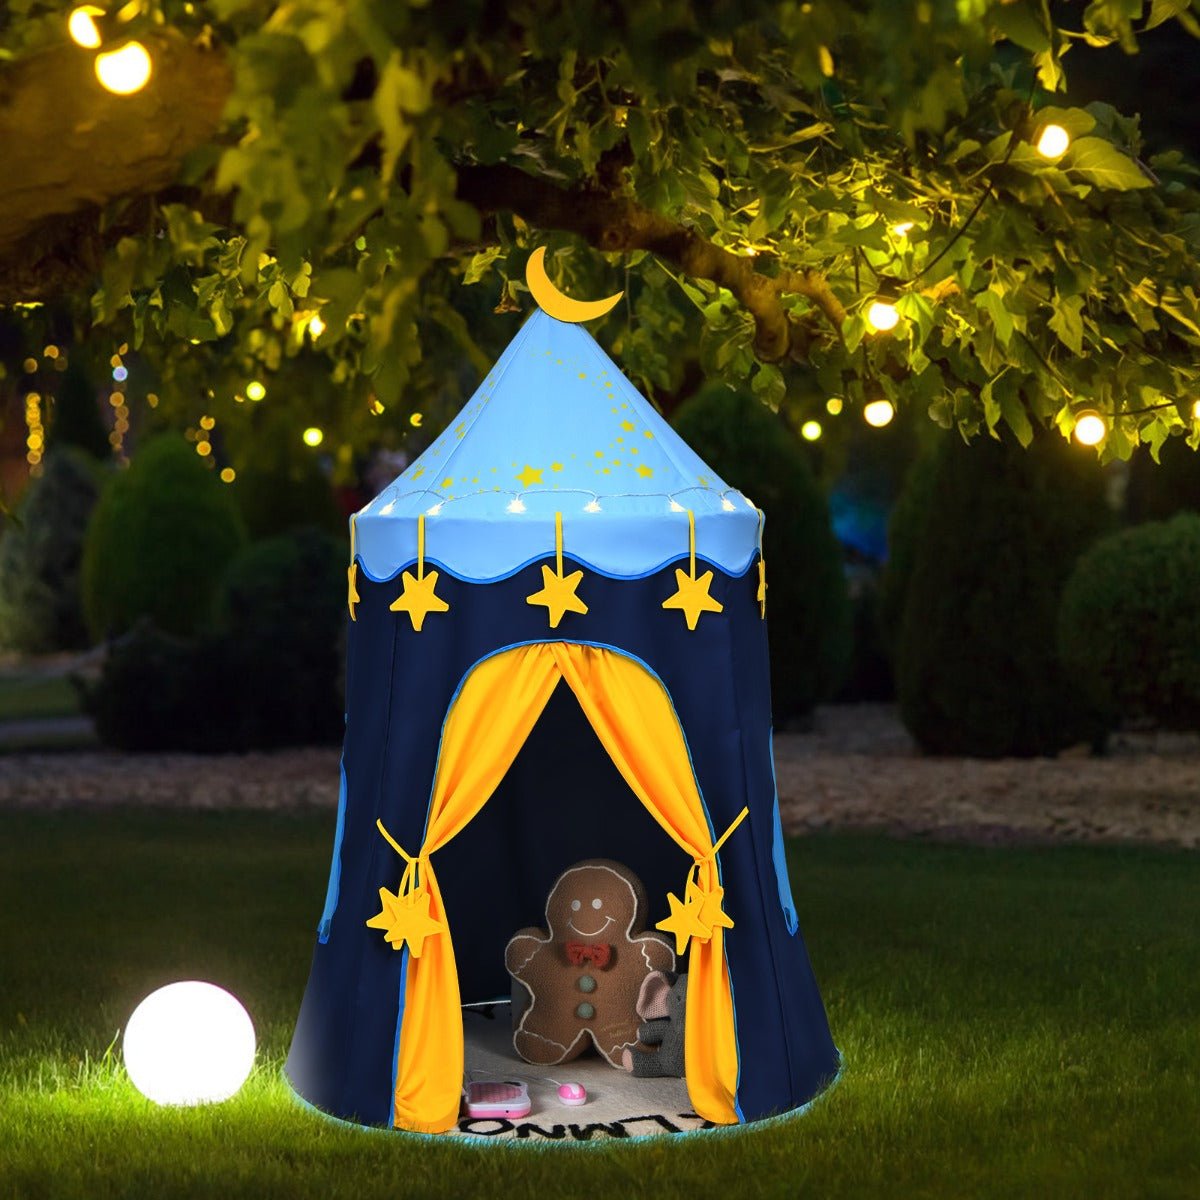 Twinkling Stars: Kids Foldable Play Tent with Carry Bag & Lights